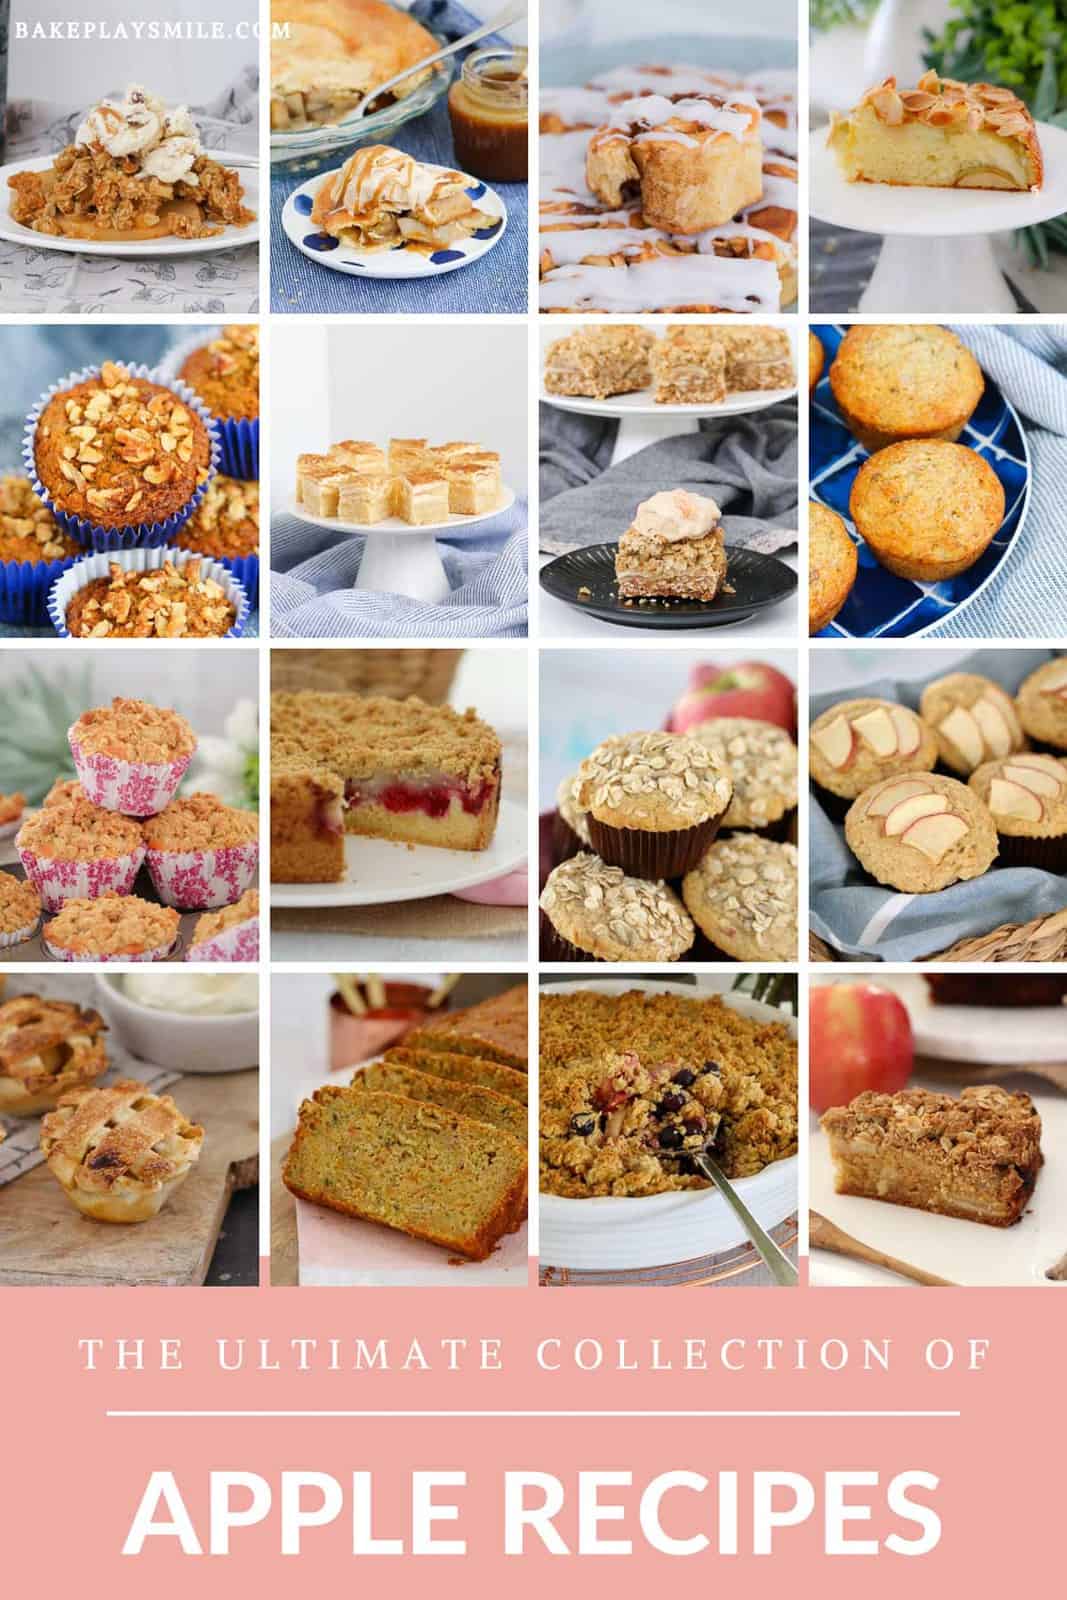 A collage of sweet recipes including cakes, muffins, pies, crumbles and slices, all made with apples.